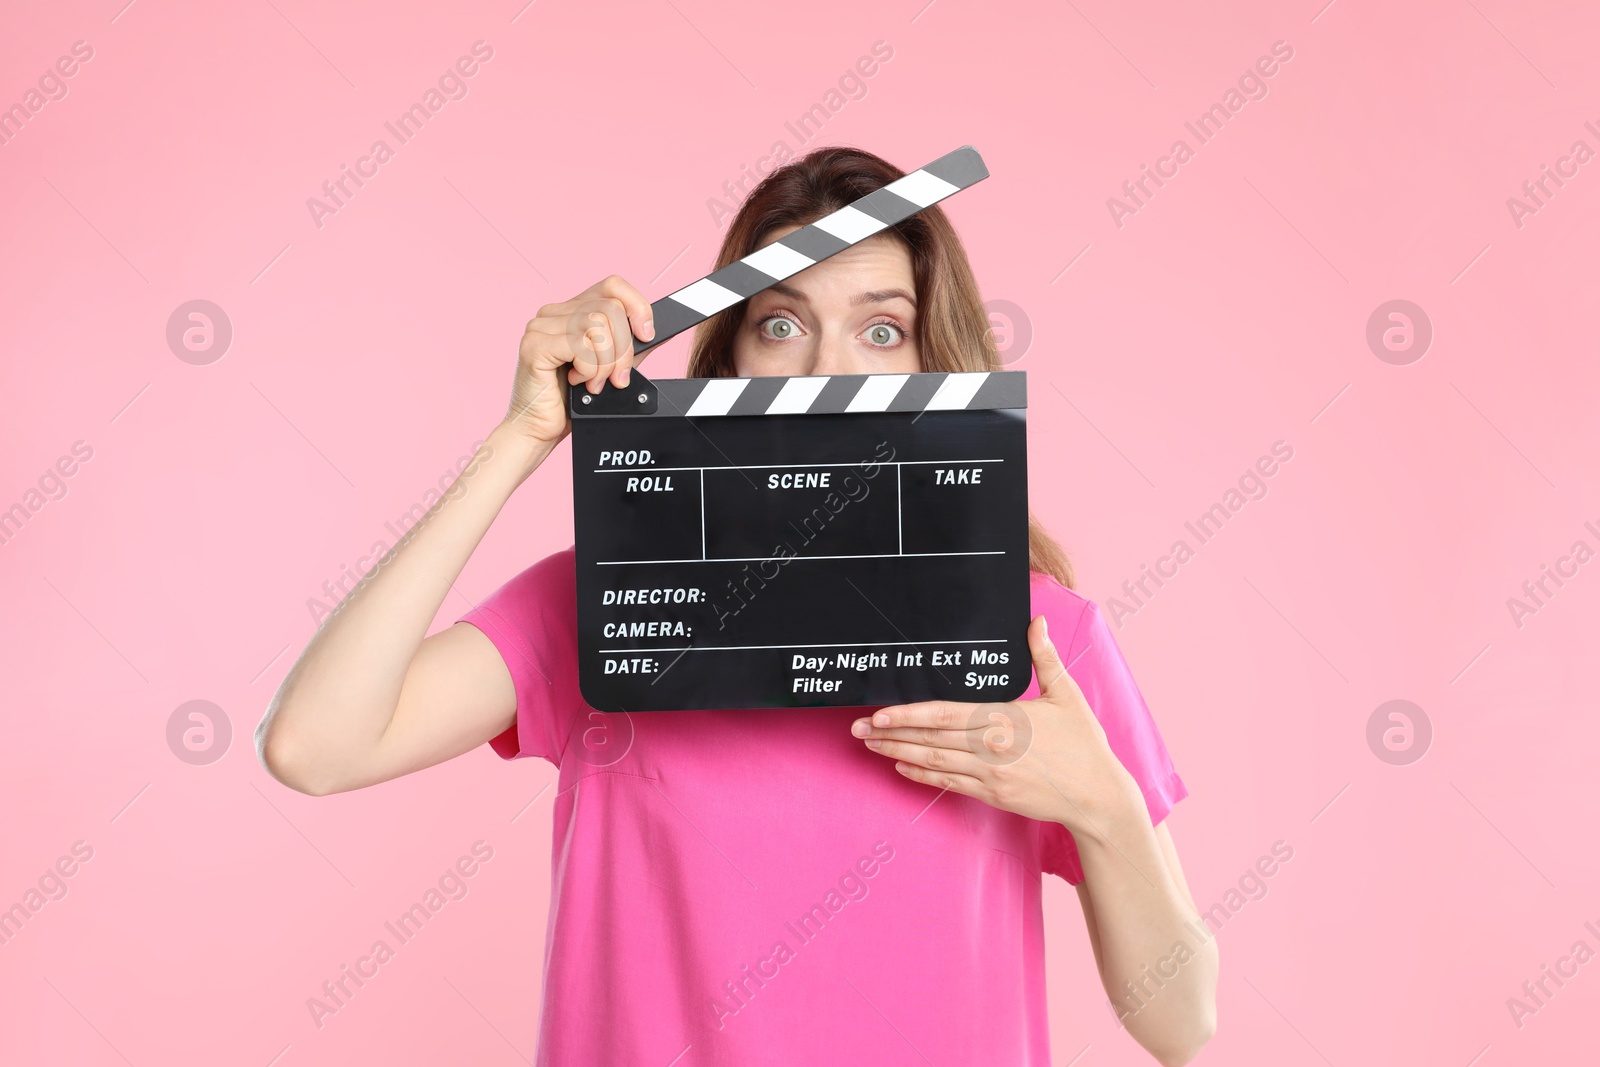 Photo of Making movie. Woman with clapperboard on pink background